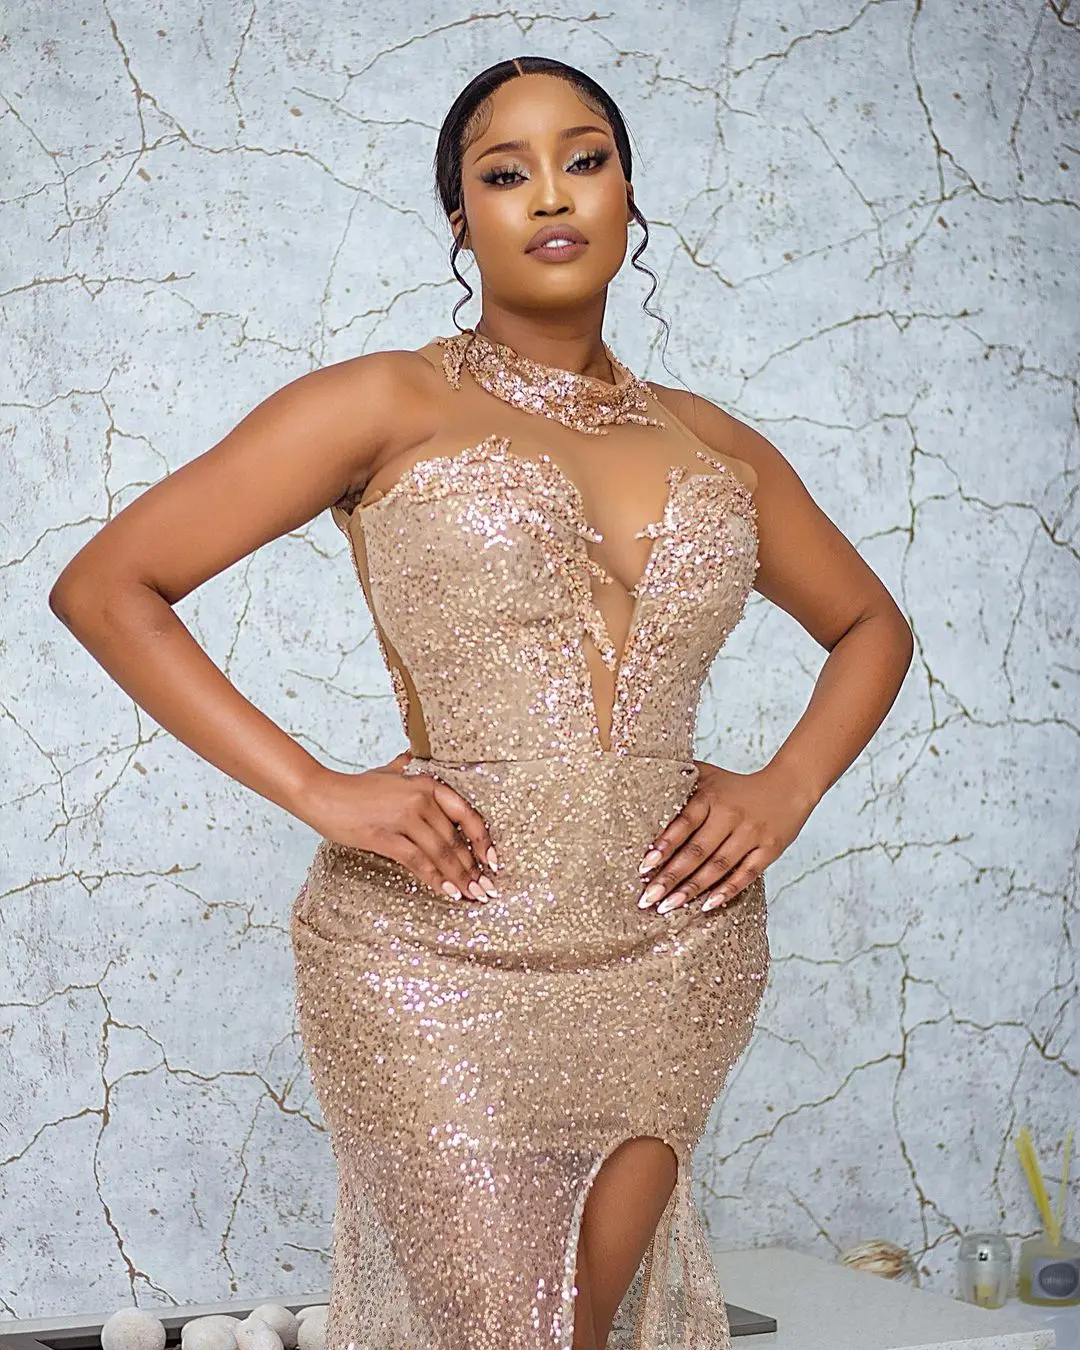 Photos: Reality TV star Eva Modika launches her first beauty store